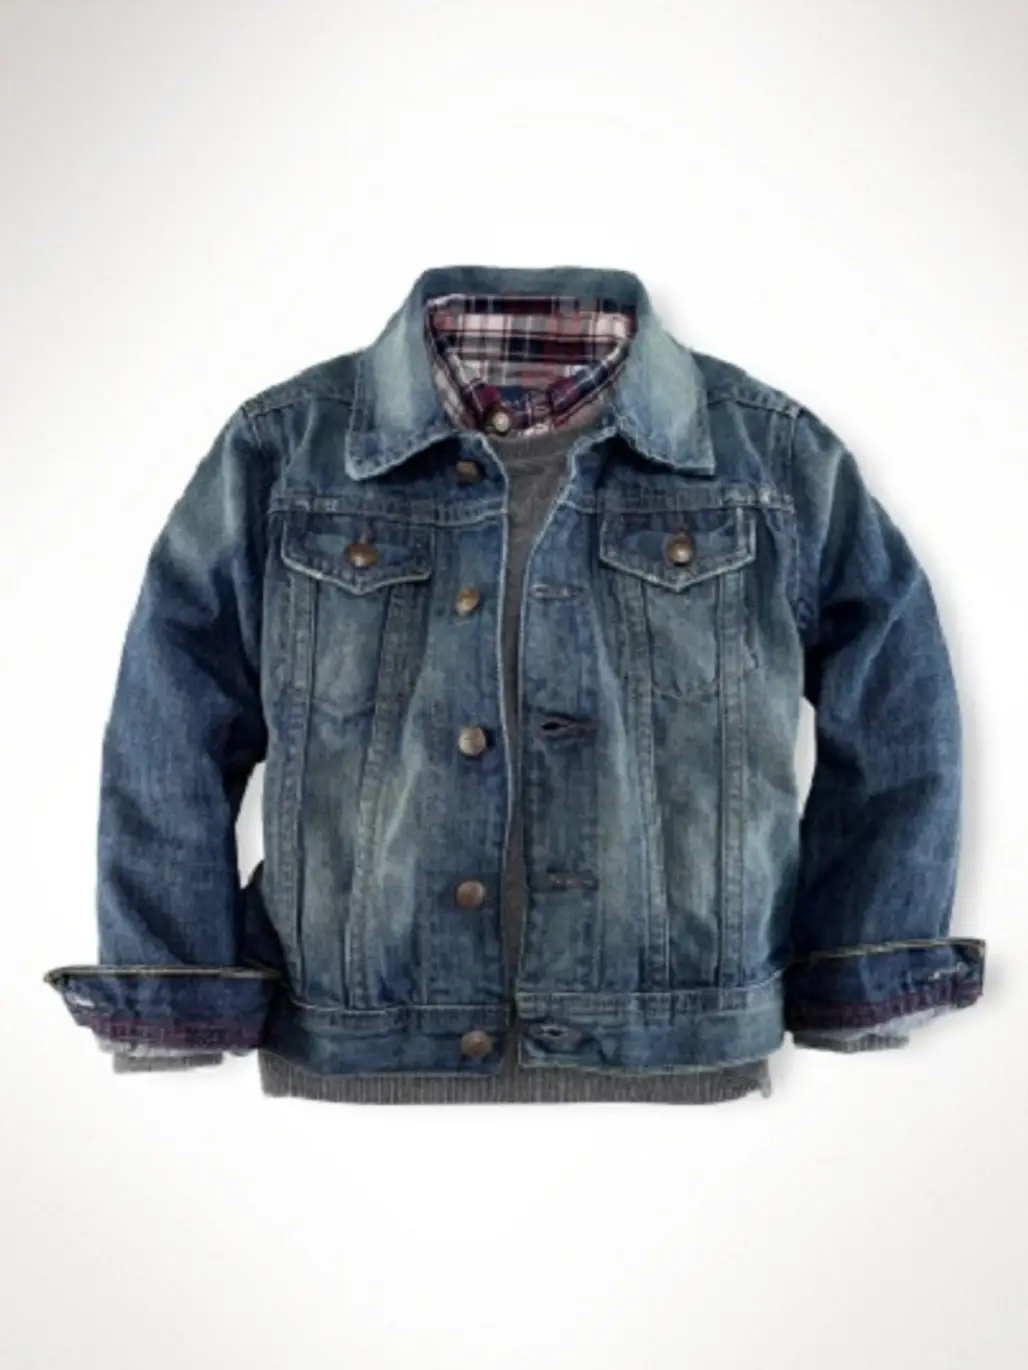 Classic Jean Jacket: Comfortable Designer Clothes for Kids...